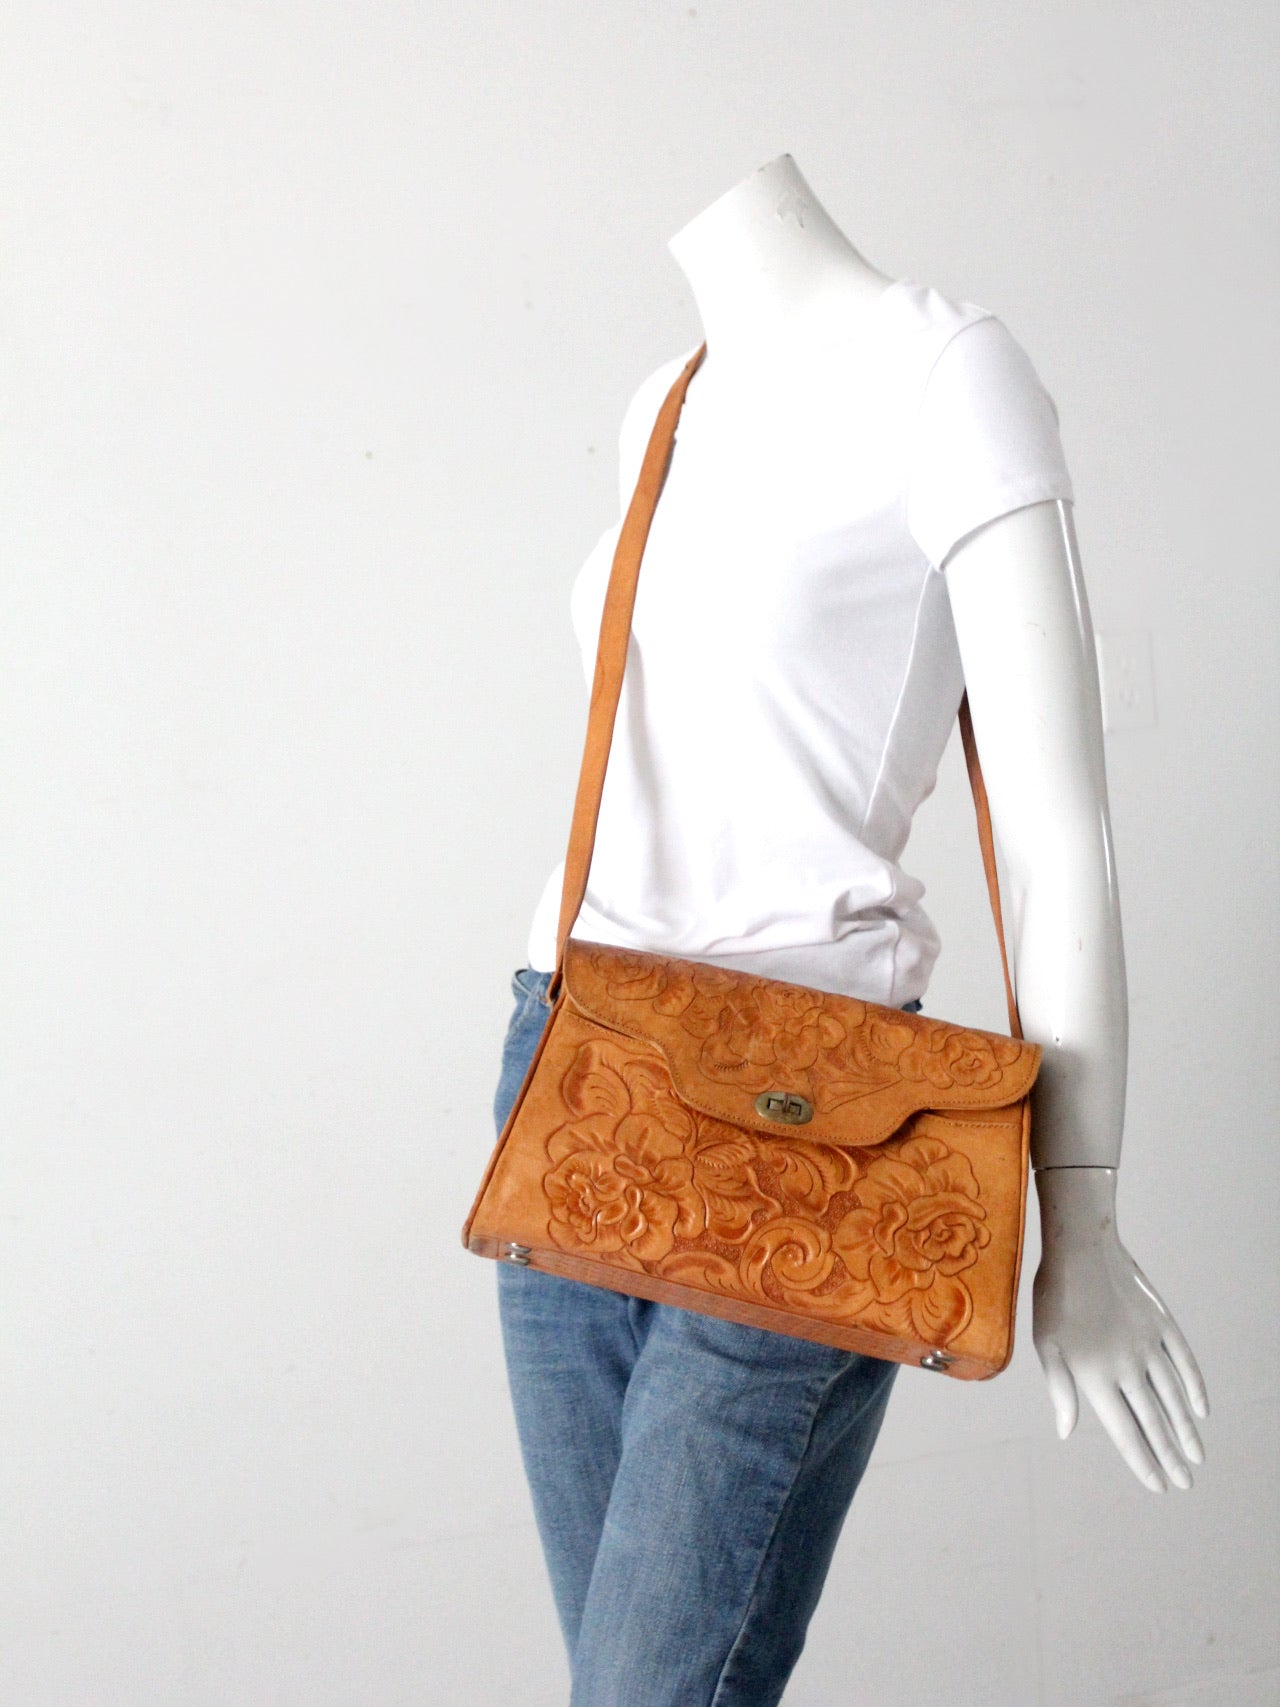 Vintage Tooled Leather Purse with Adjustable Strap - clothing & accessories  - by owner - apparel sale - craigslist